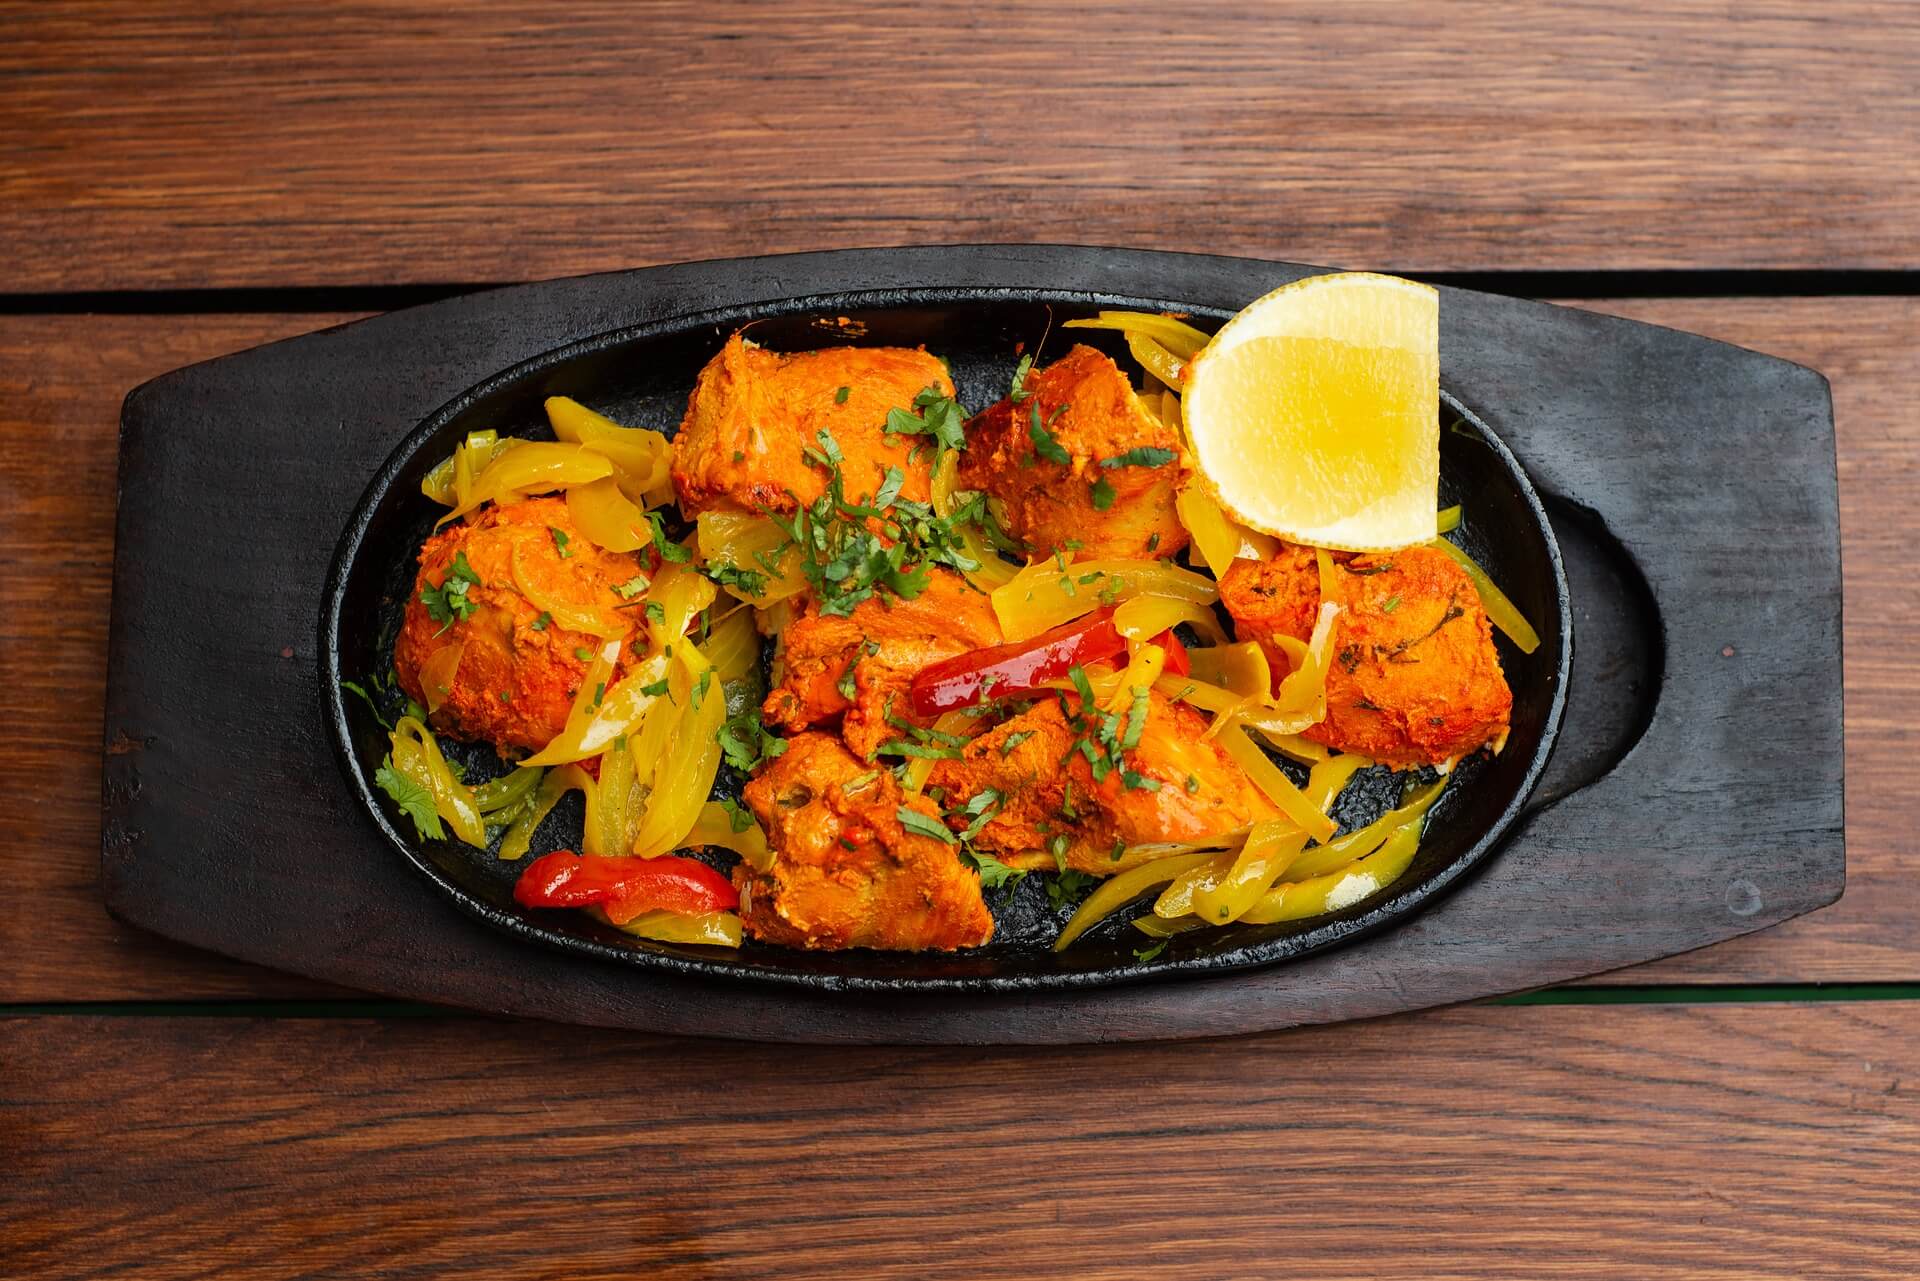 How to Find an Authentic Indian Restaurant in Kilkenny